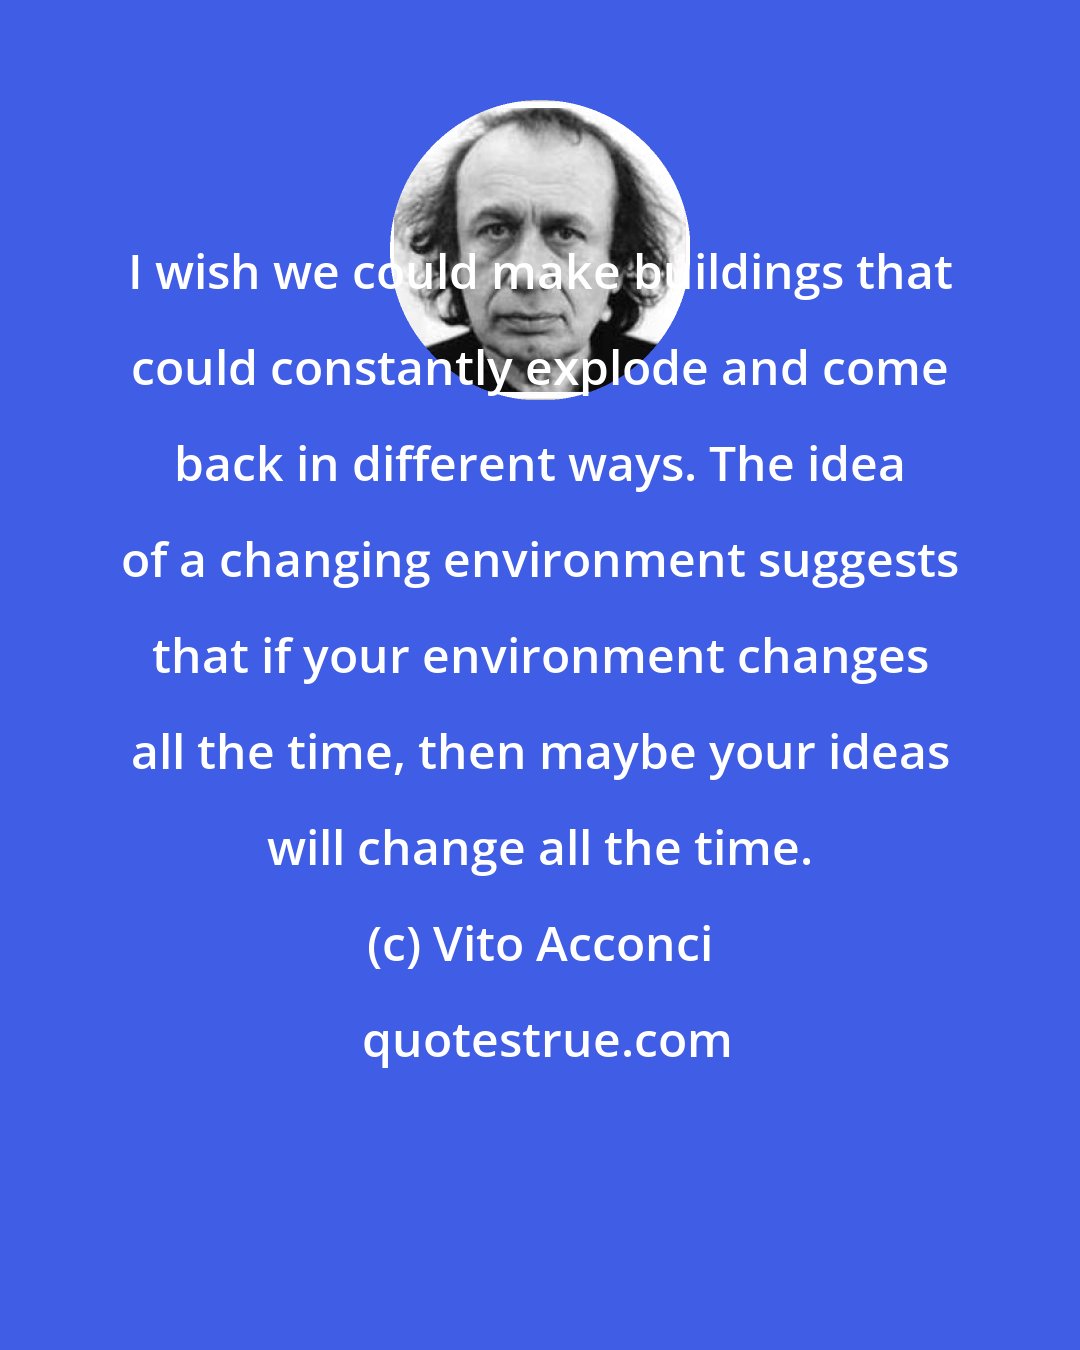 Vito Acconci: I wish we could make buildings that could constantly explode and come back in different ways. The idea of a changing environment suggests that if your environment changes all the time, then maybe your ideas will change all the time.